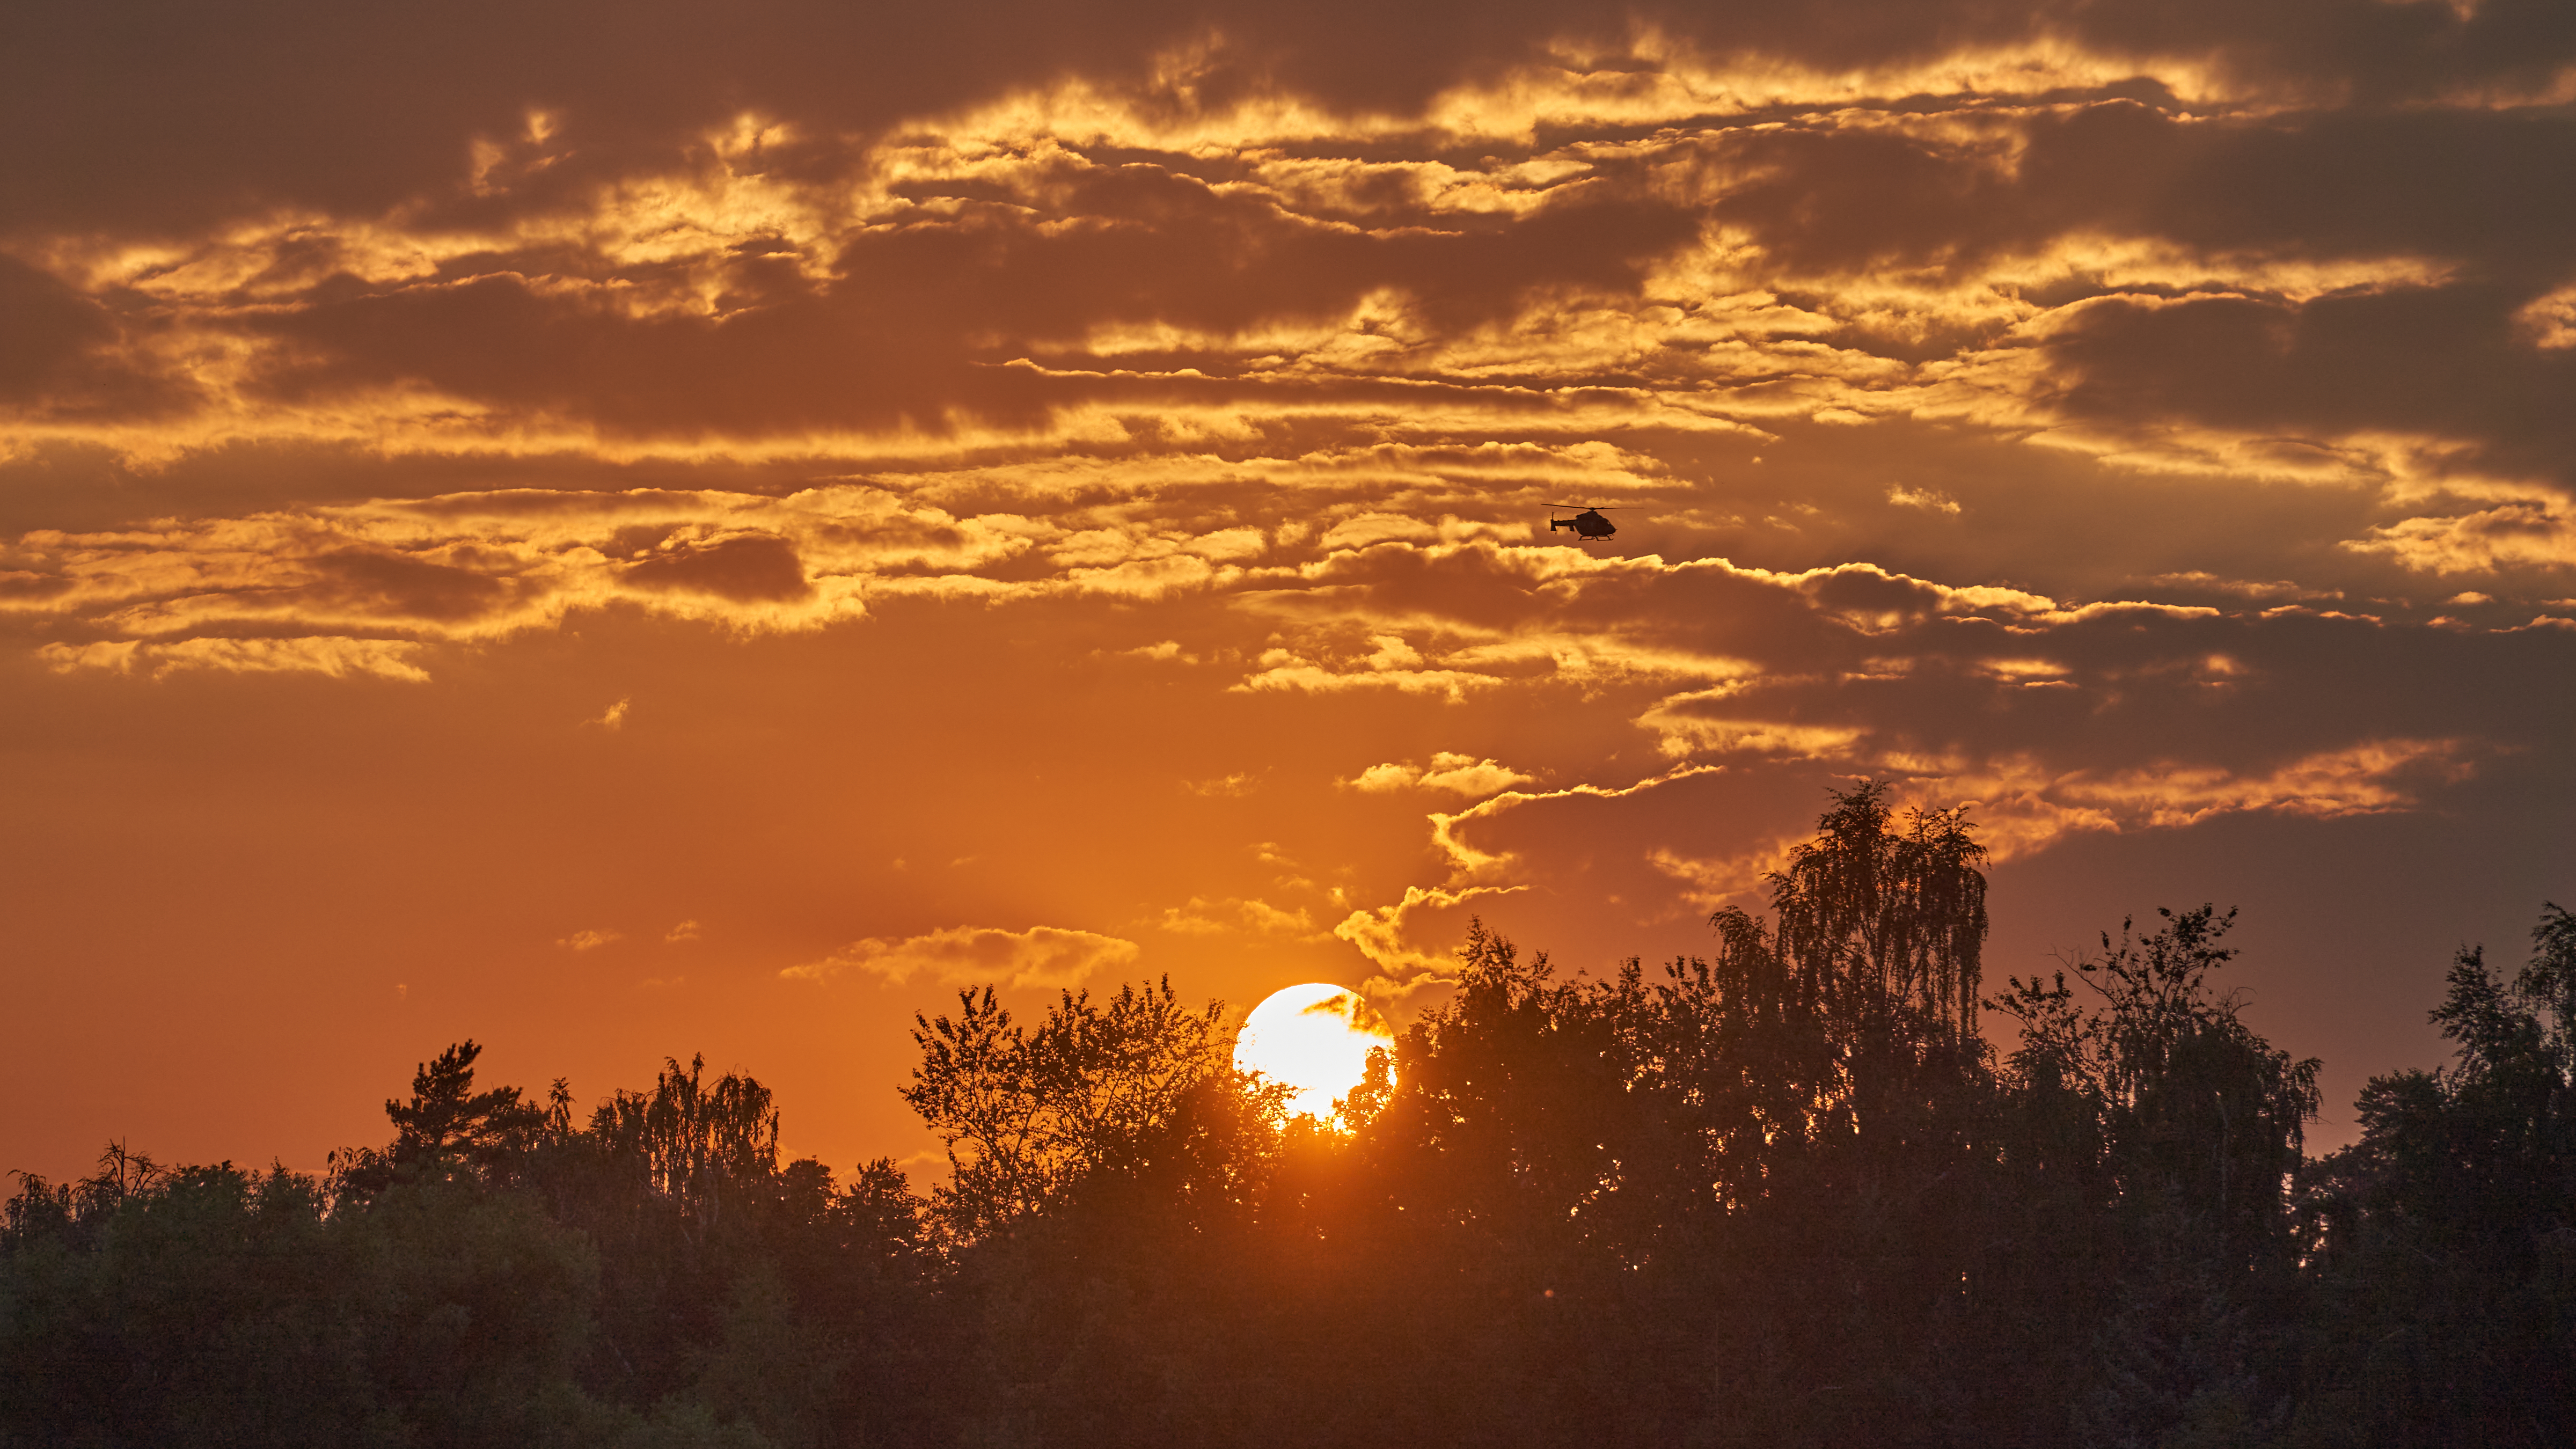 Sunset Sun Trees Clouds Russia Helicopters 4800x2700